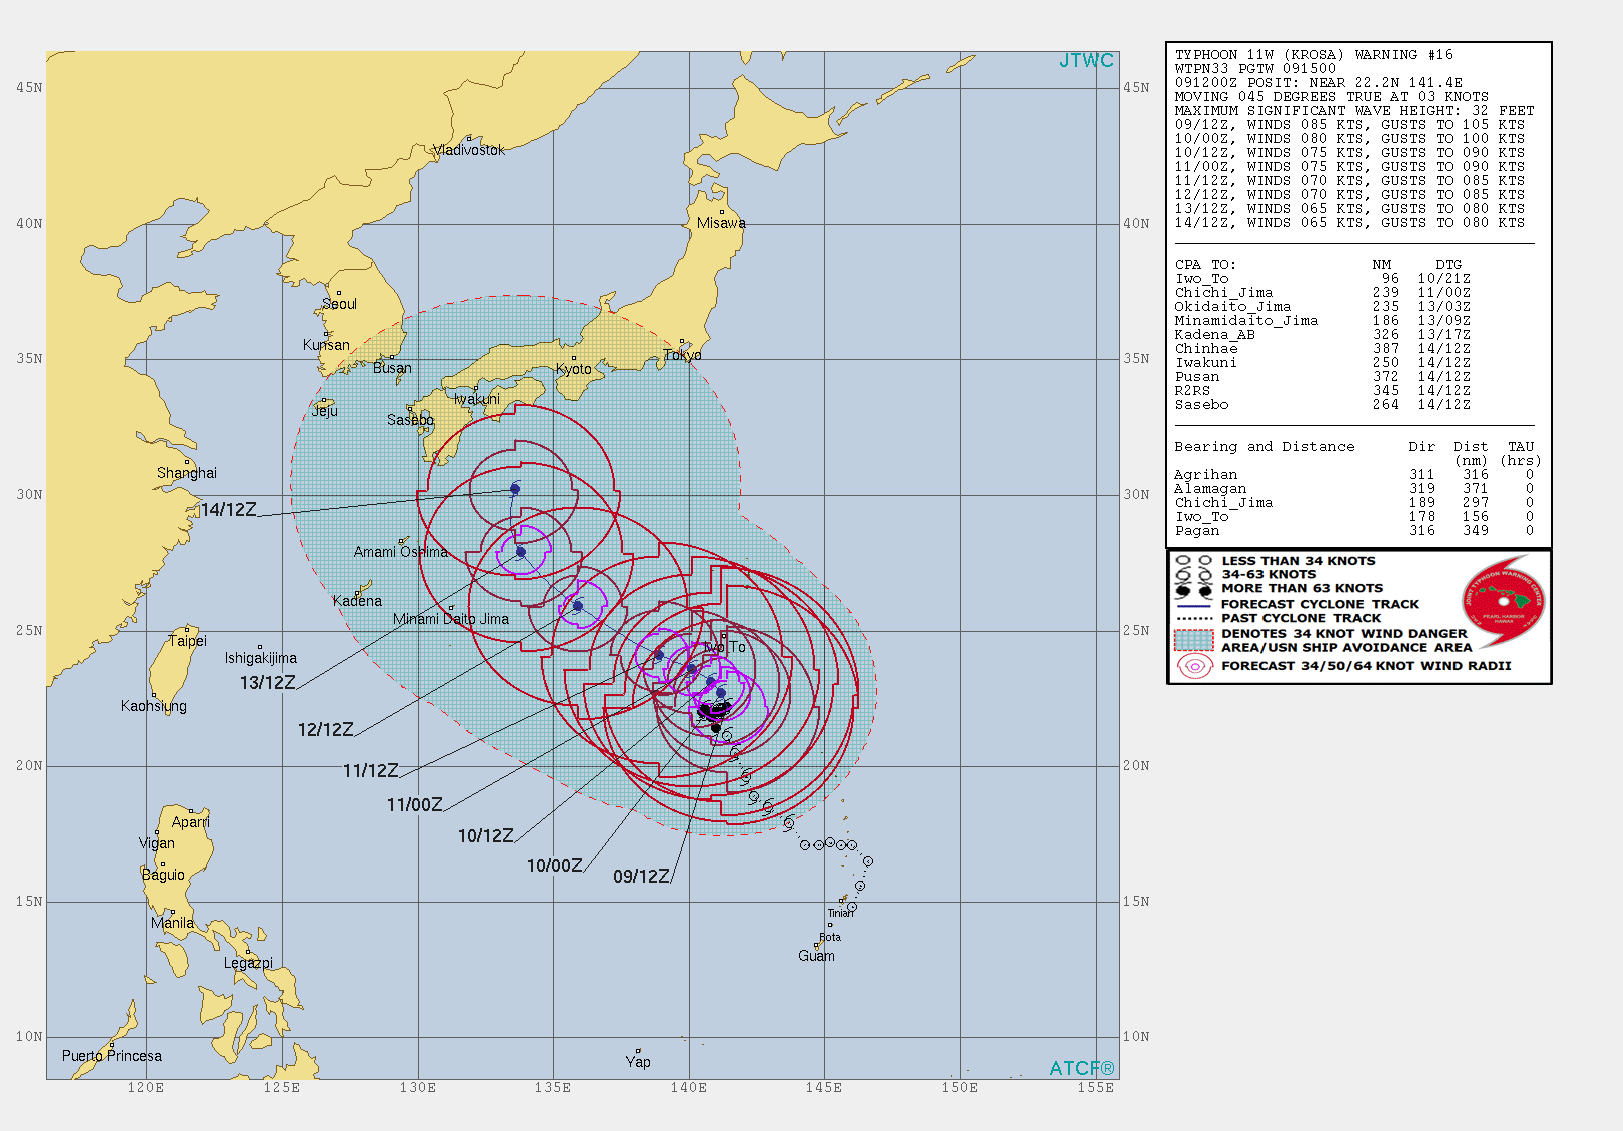 KROSA(11W): WARNING 16: TYPHOON INTENSITY FORECAST FOR THE NEXT 5 DAYS AS THE CYCLONE SLOWLY APPROACHES SOUTHERN JAPAN